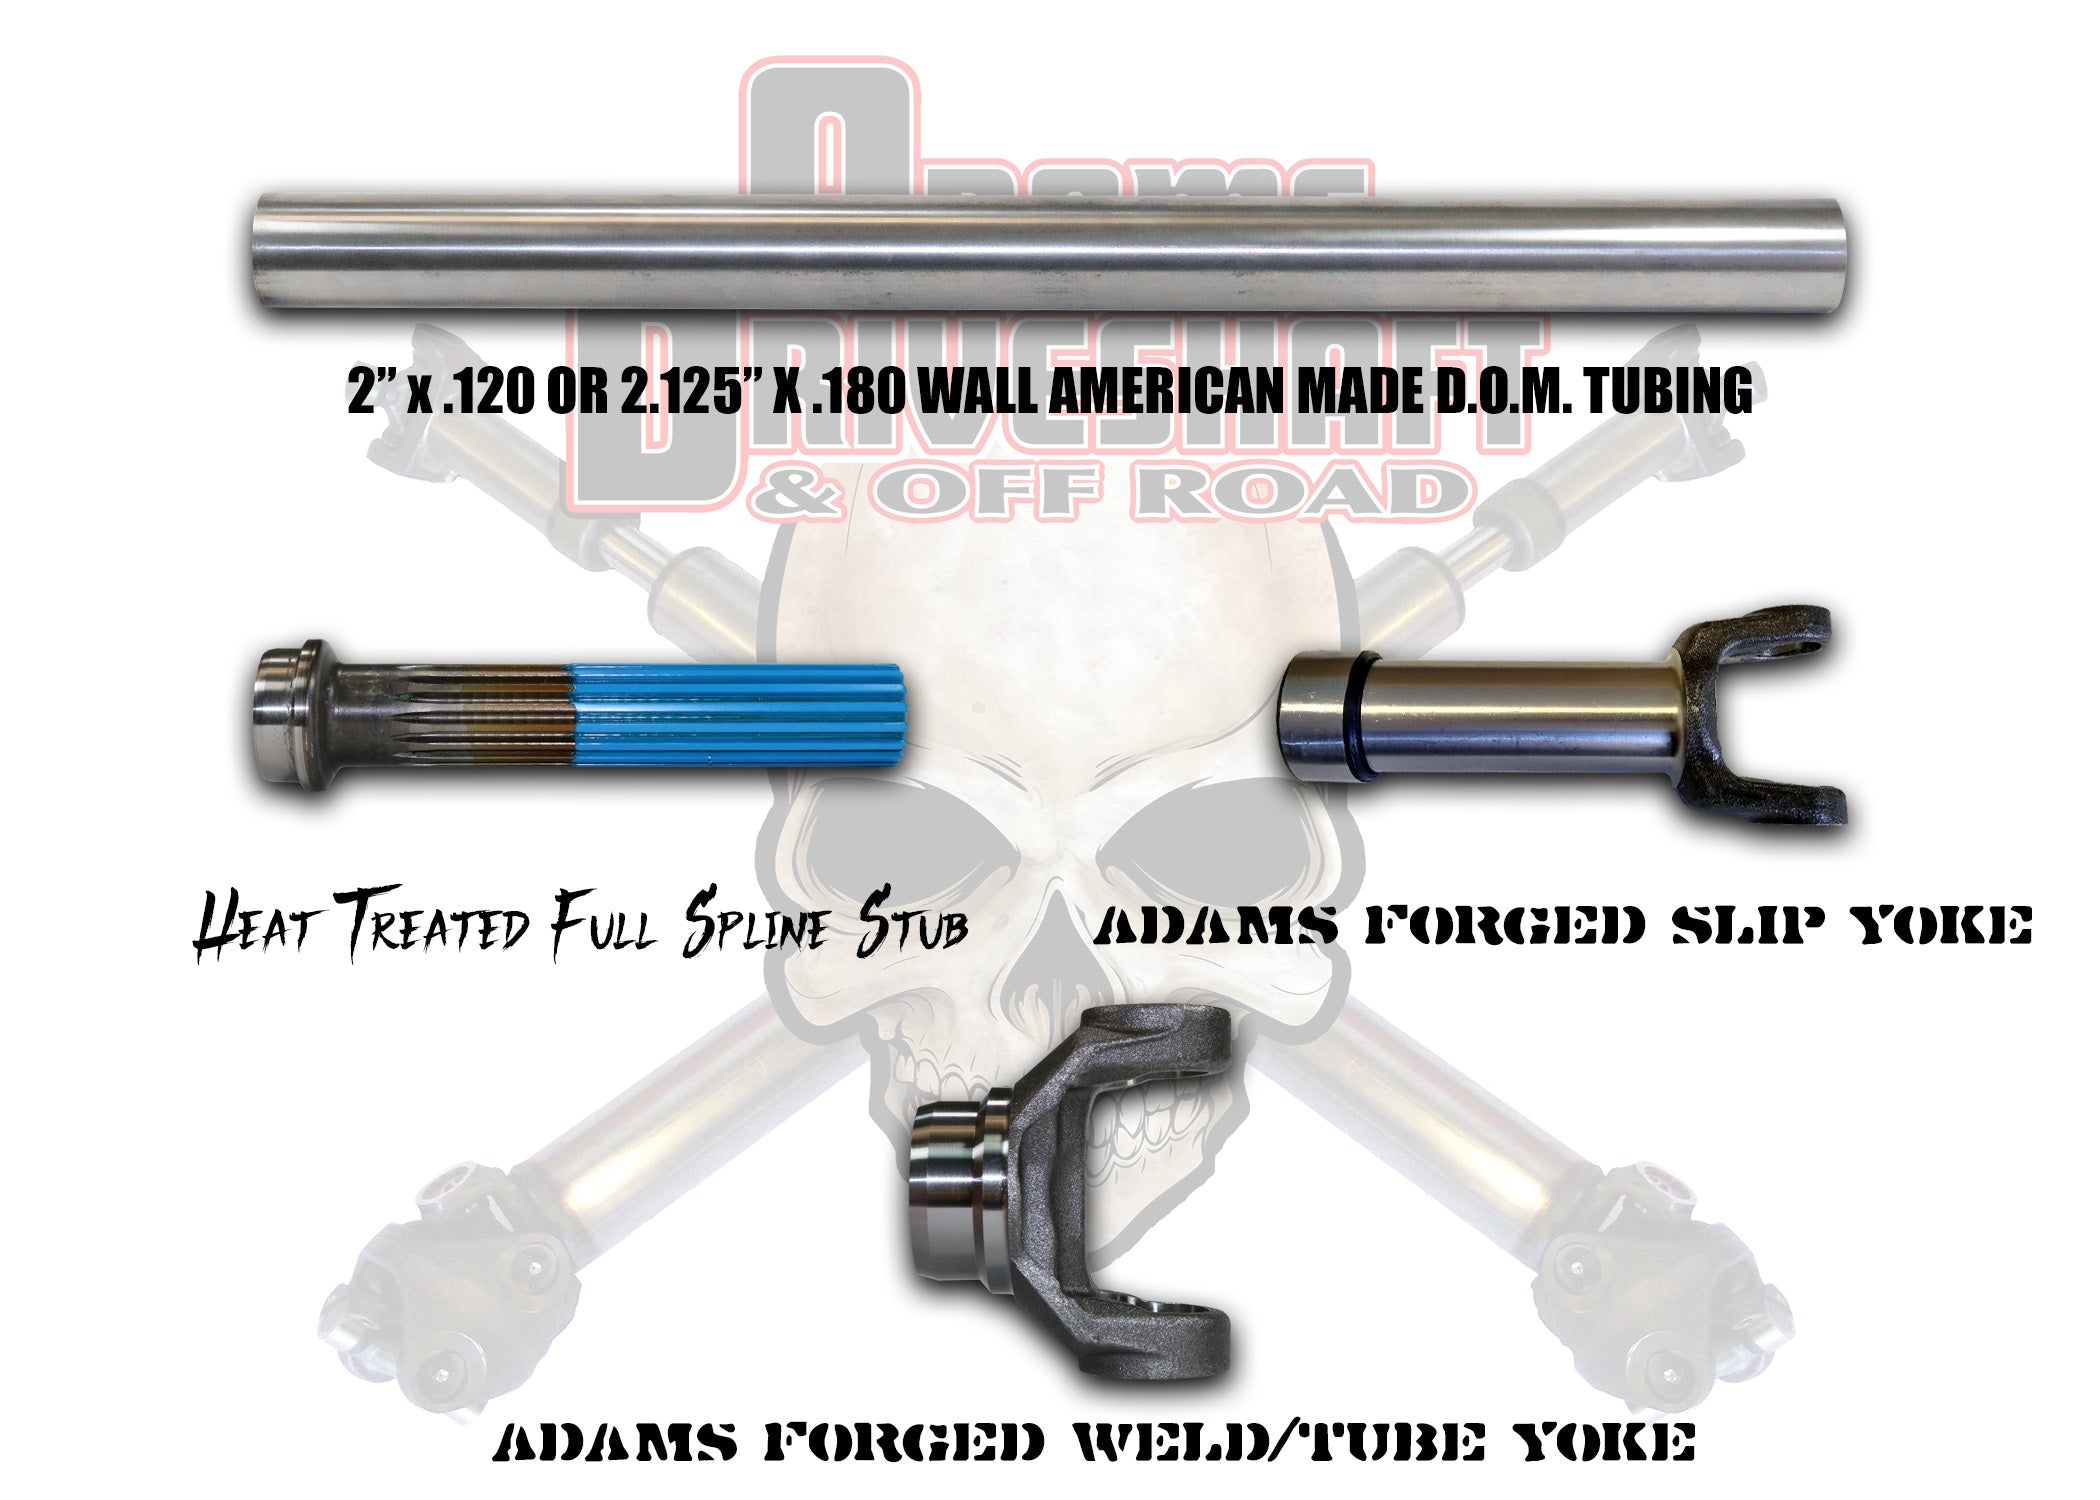 Adams Driveshaft's Build your Own - DIY - Offroad Buggy, Jeep Driveshaft, Etc. in 1310 Series - 0